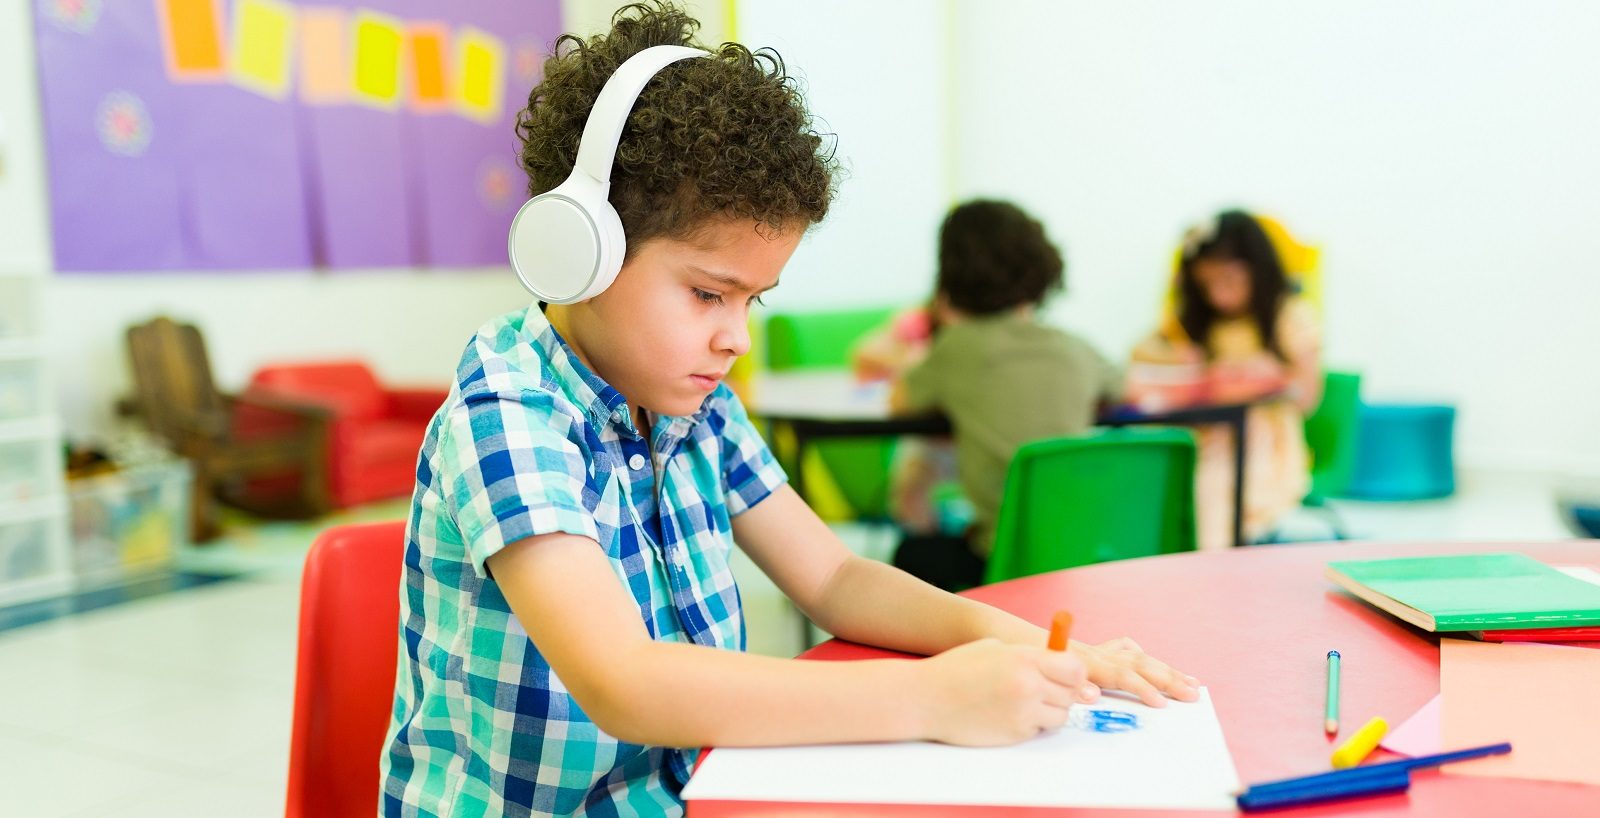 stock photo of boy in green and blue check shirt wearing headphones and writing in an A4 pad